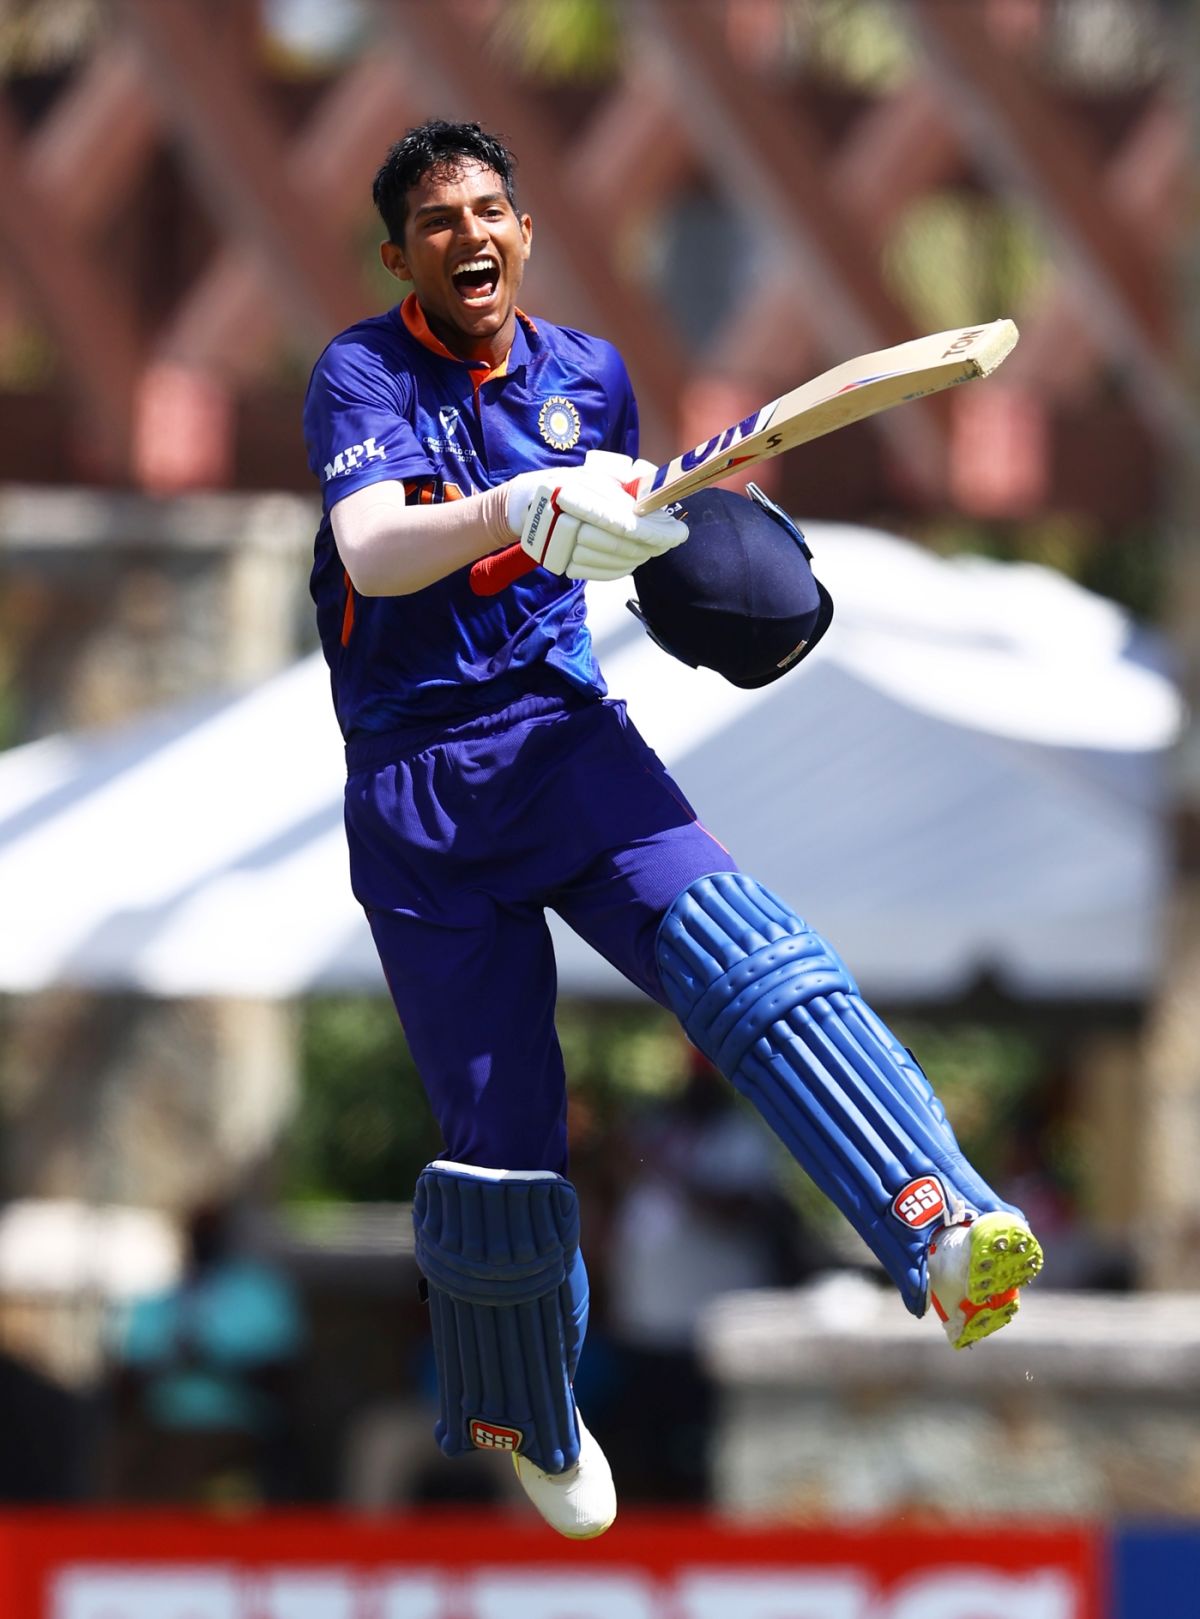 Yash Dhull became the third India captain to score a century at an Under-19 World Cup ESPNcricinfo